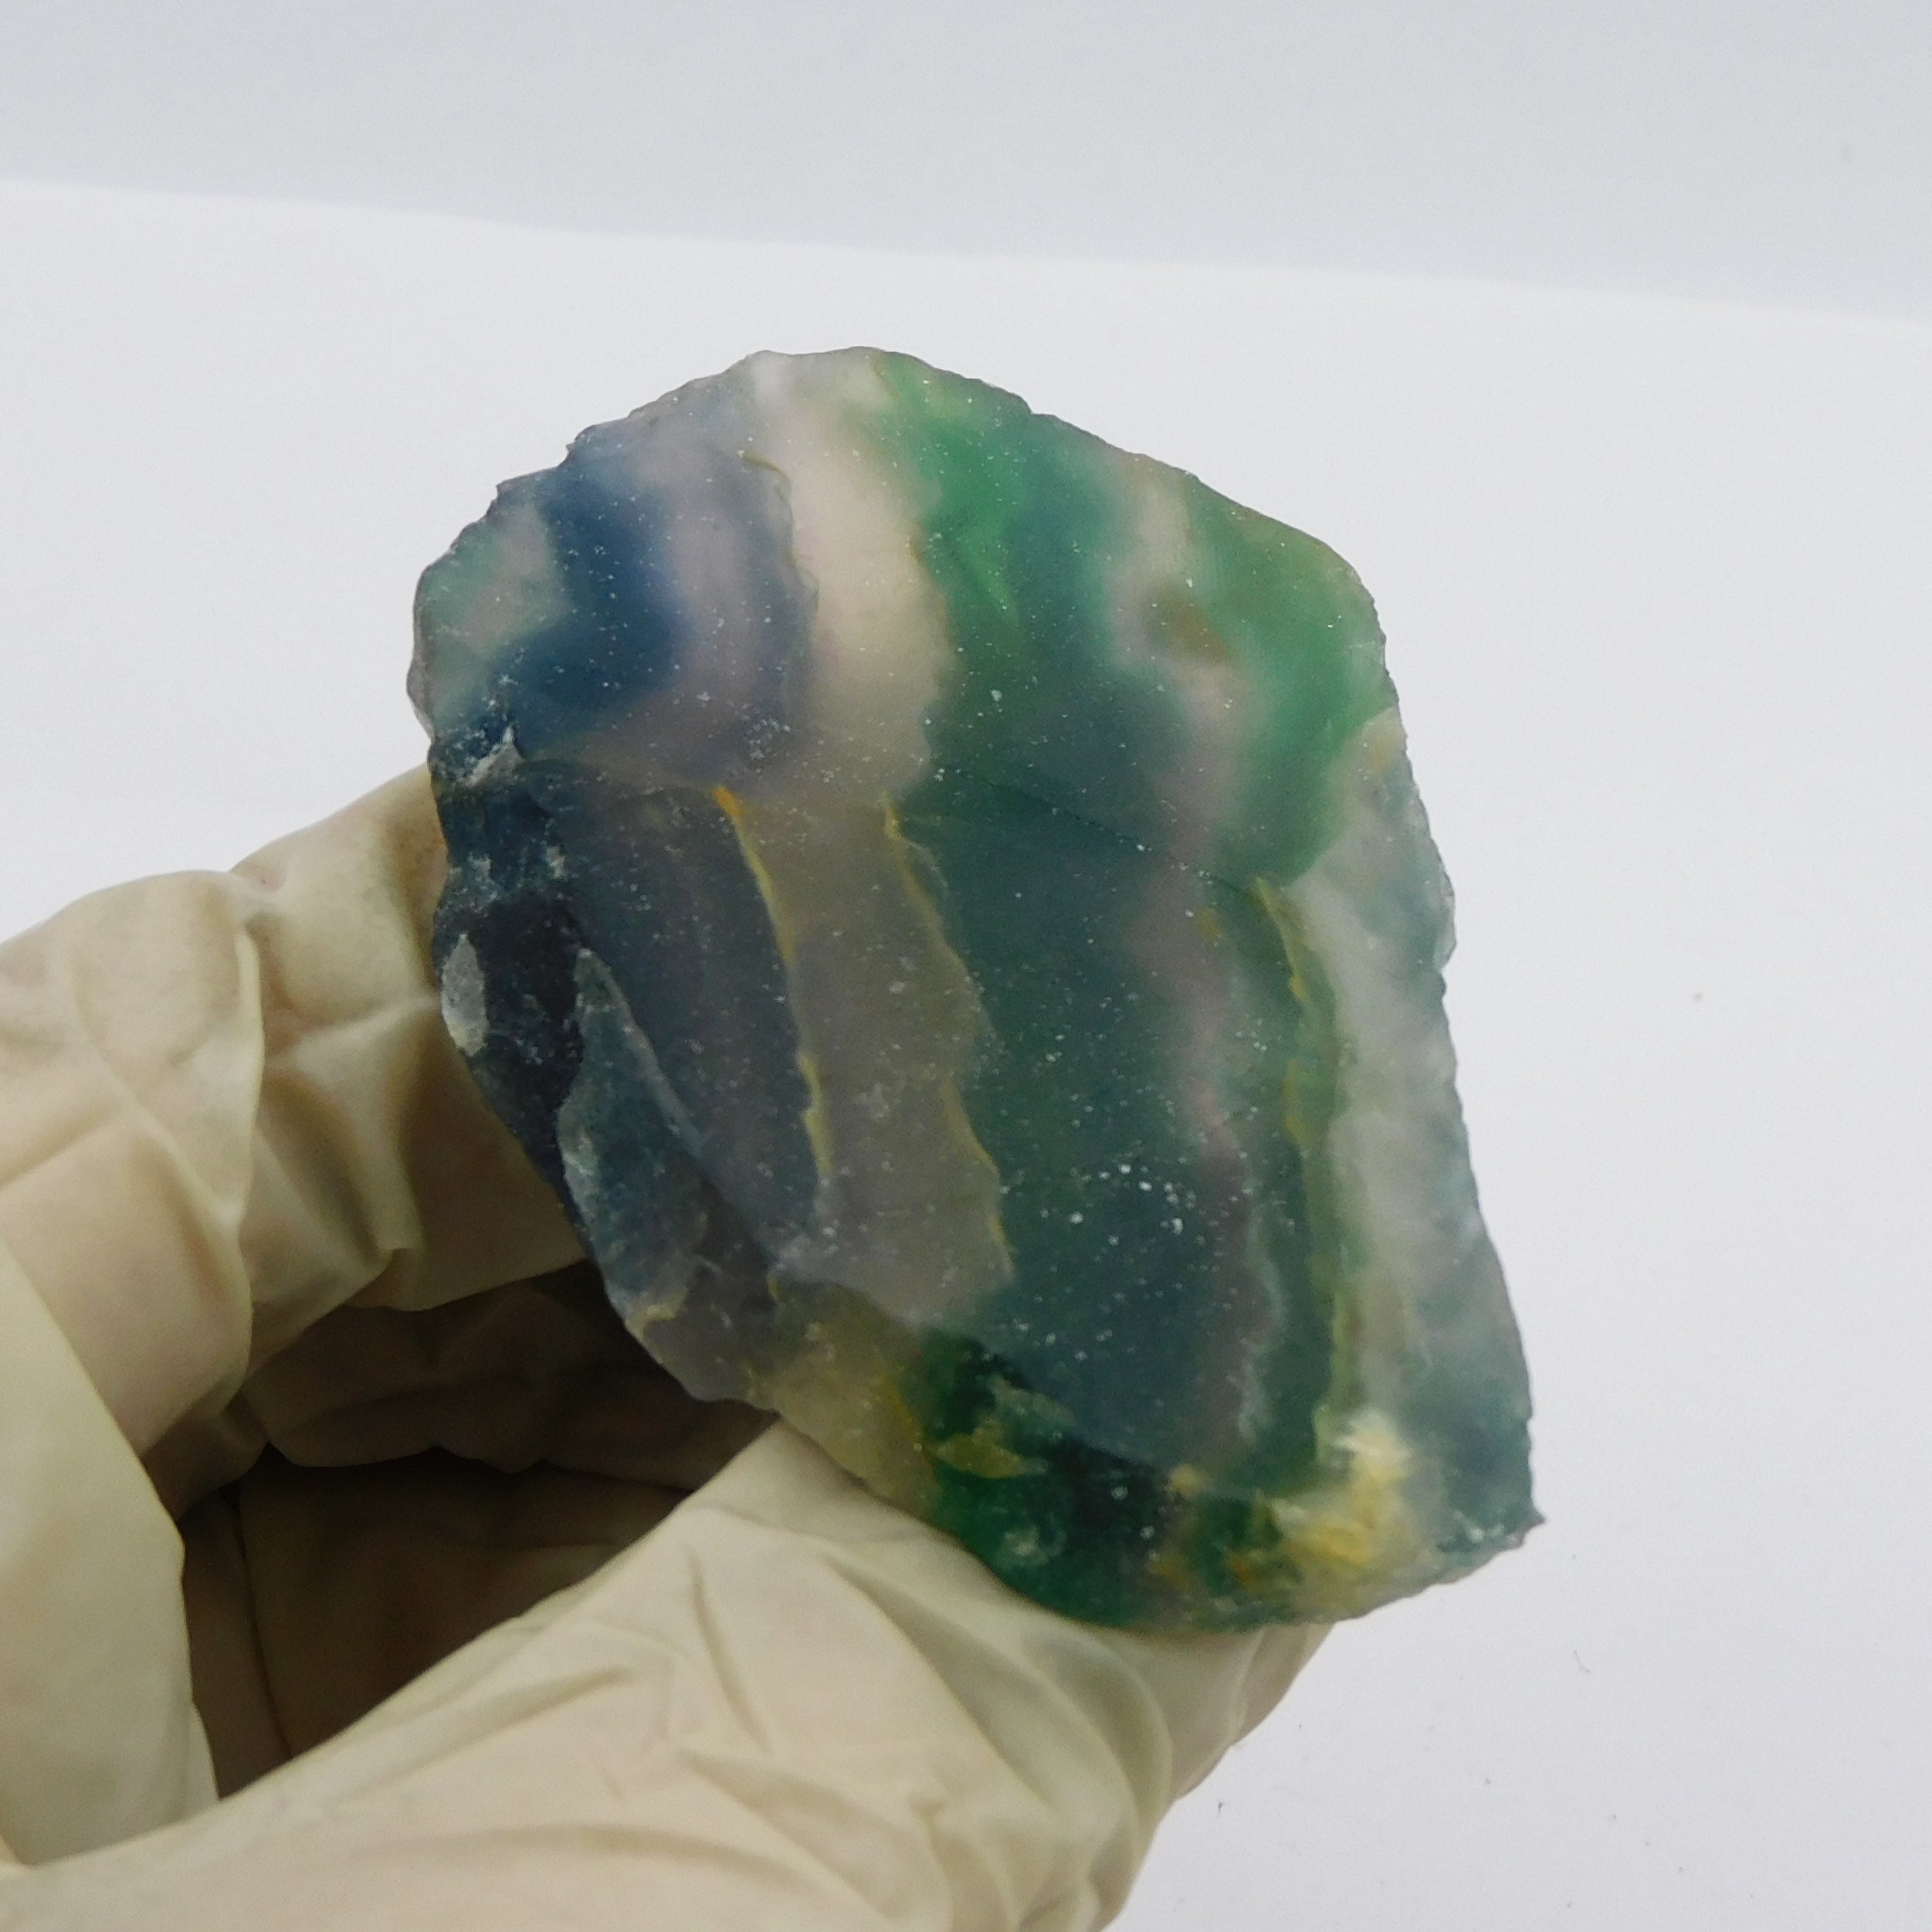 217.90 Ct Natural Mix Color Fluorite Stone Uncut Rough Stone CERTIFIED Gemstone Excellent Quality For Gift